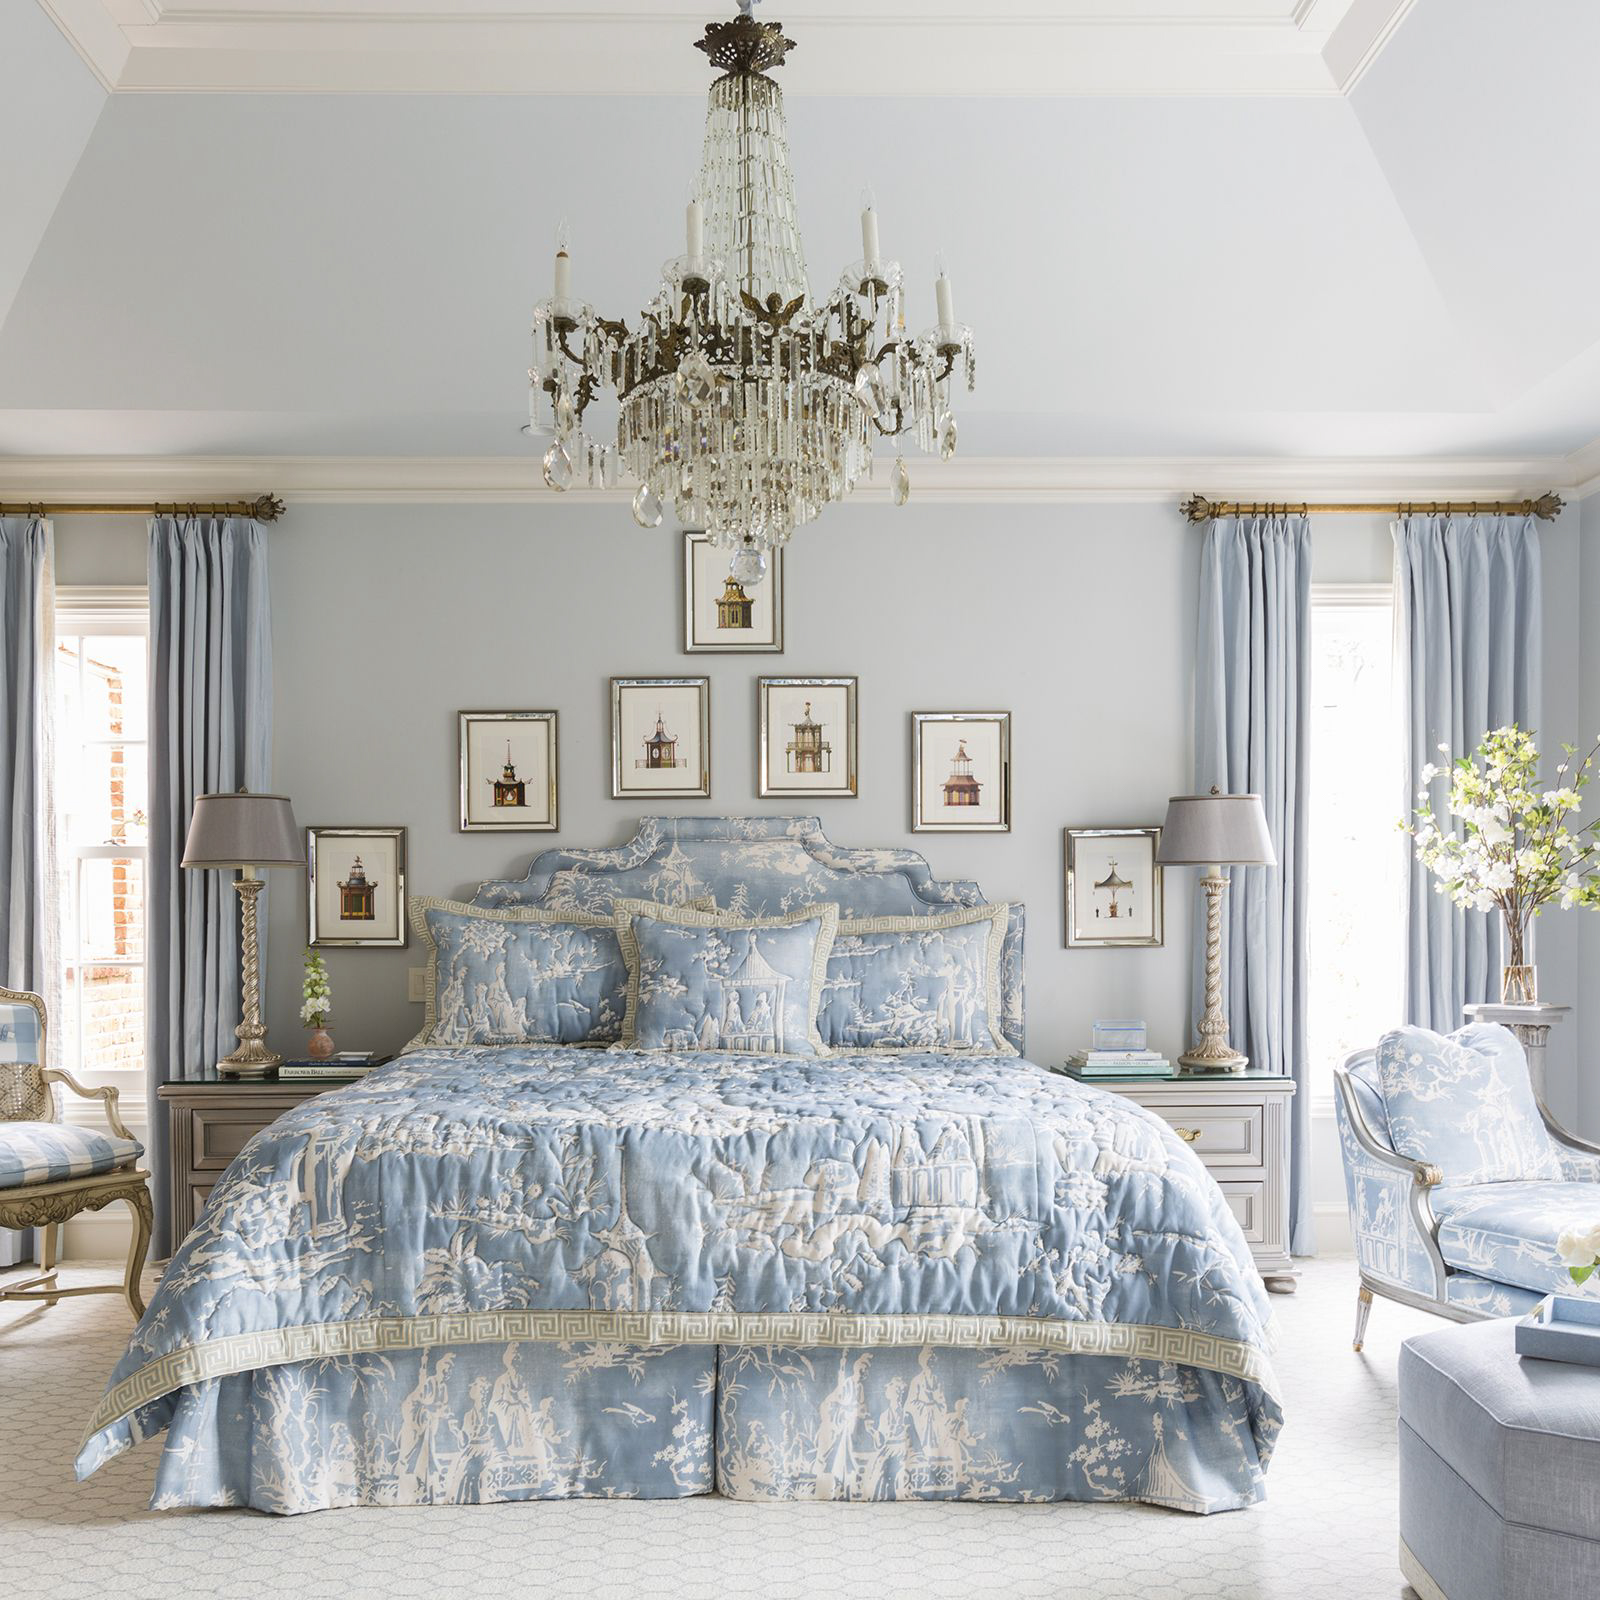 Choose the right bedroom design: make sure your bedroom is designed with that thought in mind.